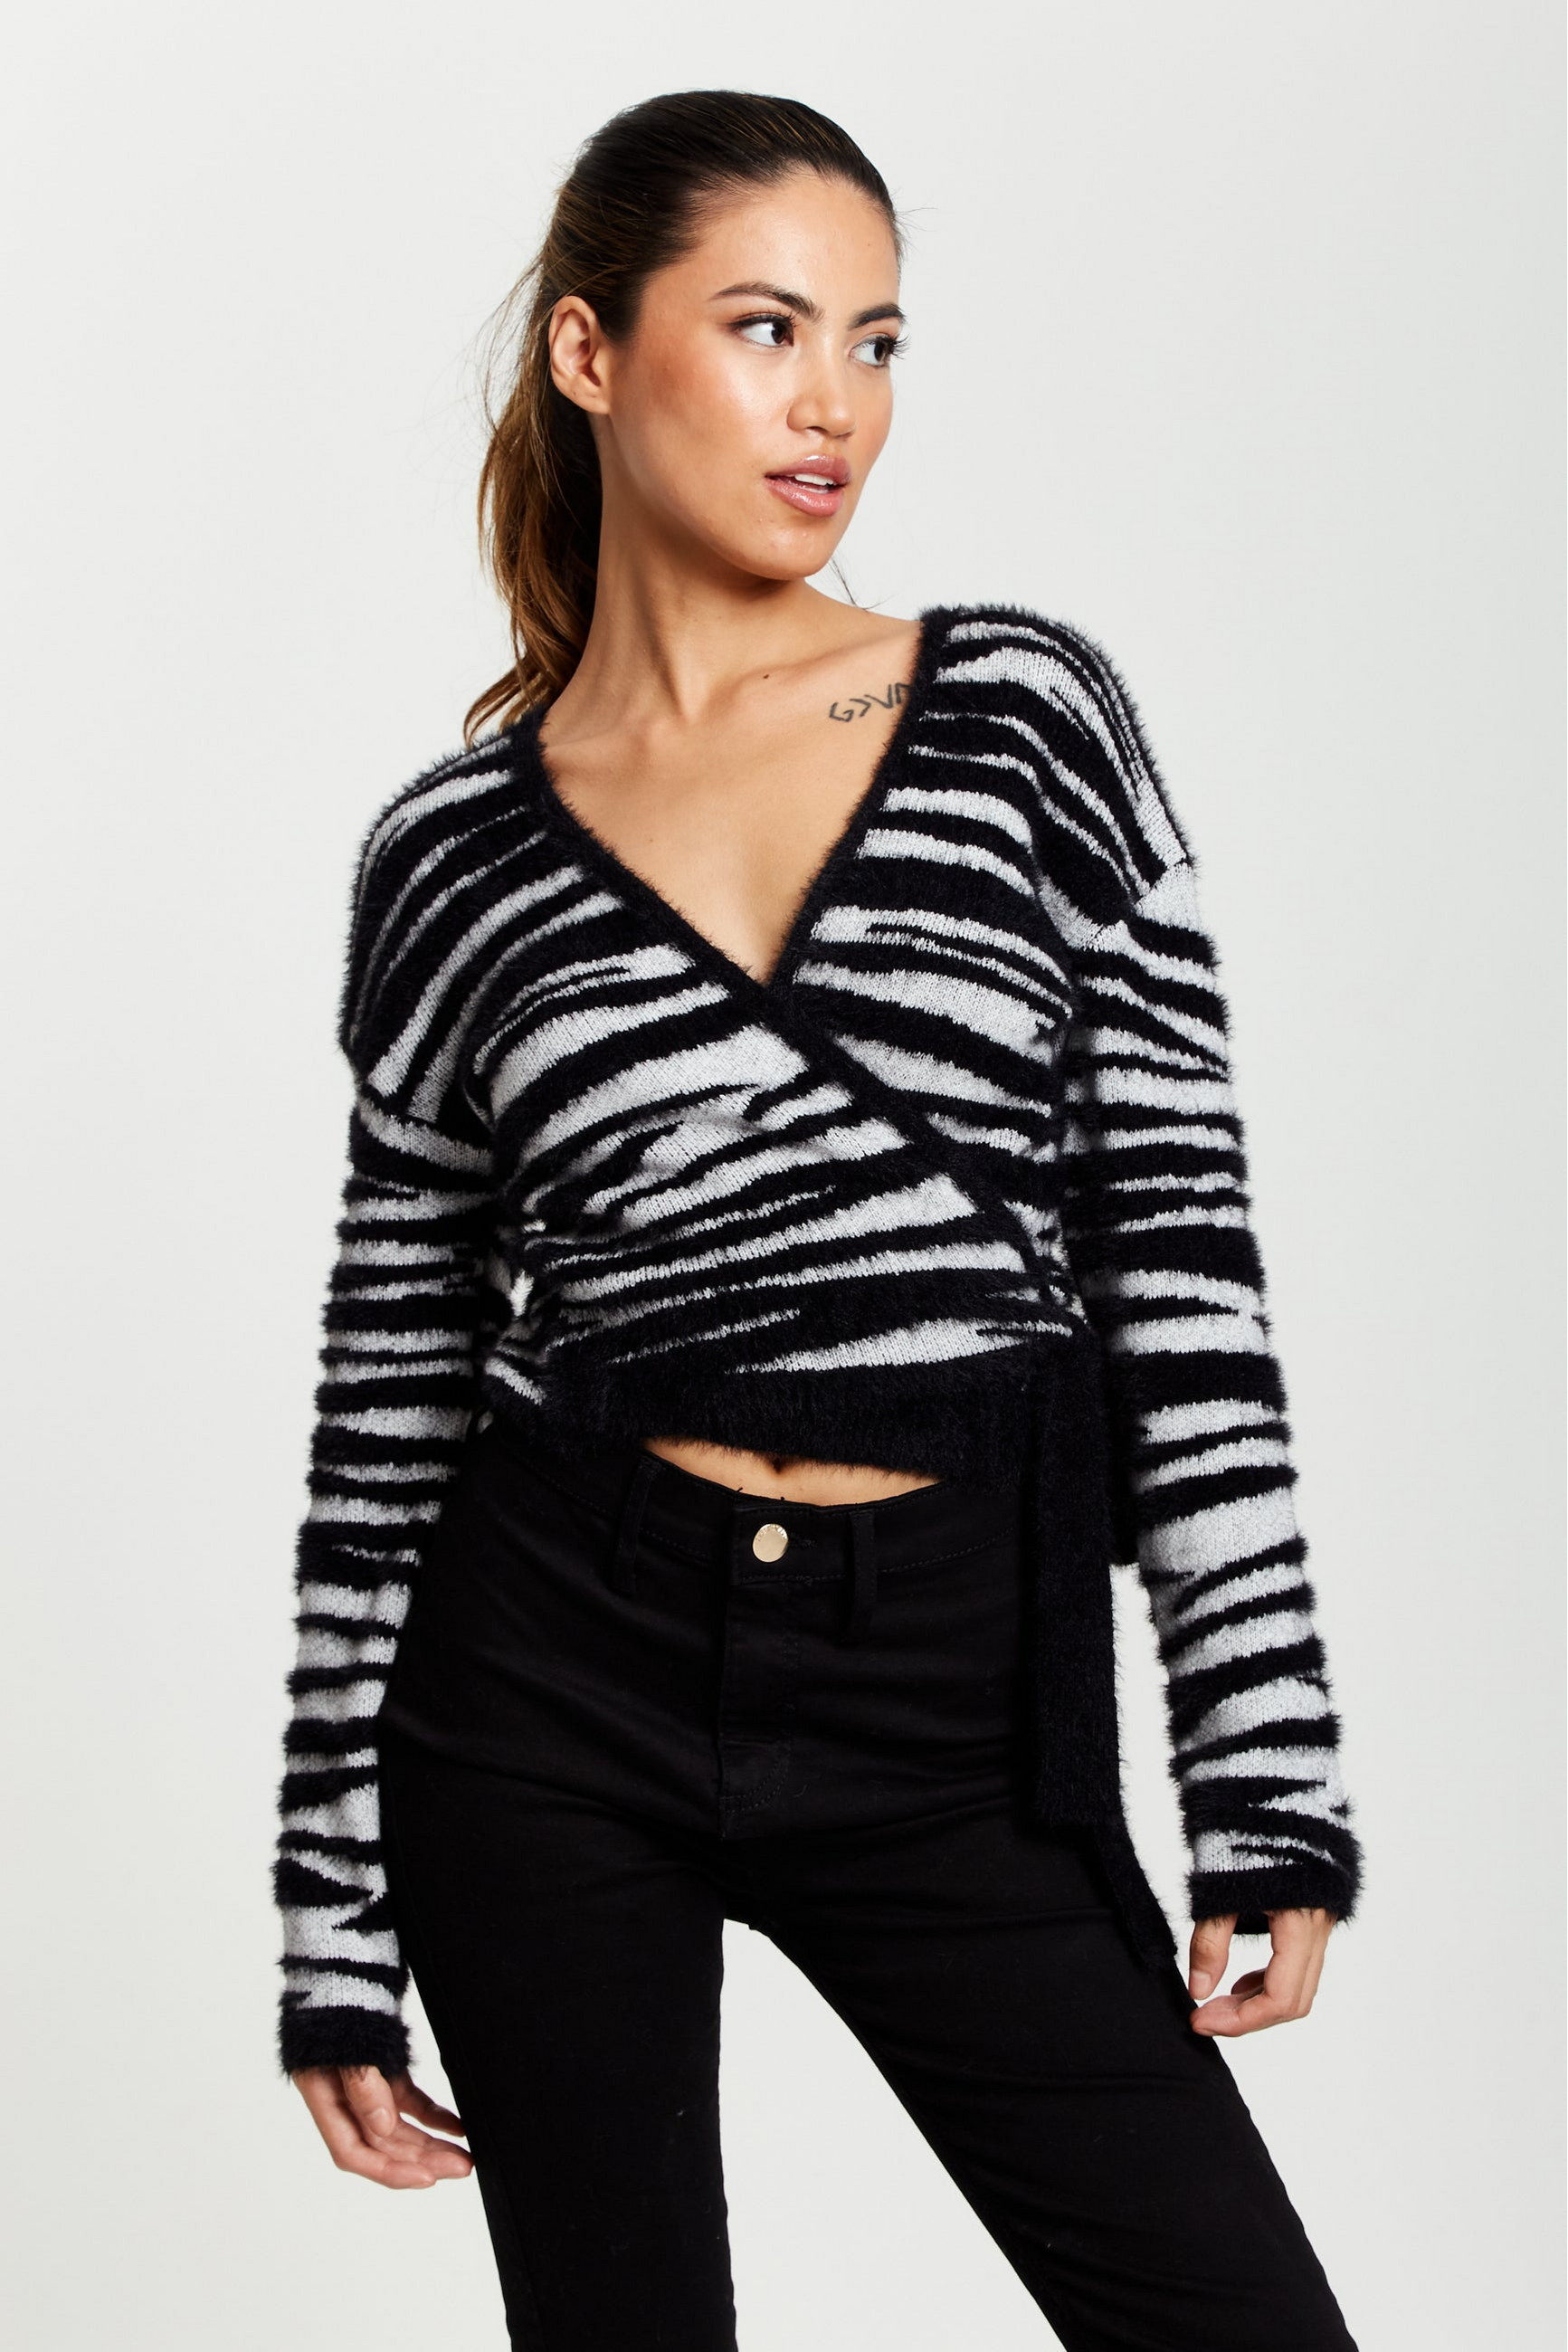 Zebra Pattern Wrap Cardigan In Black And Whit E8-139-LS-L22SS007-A